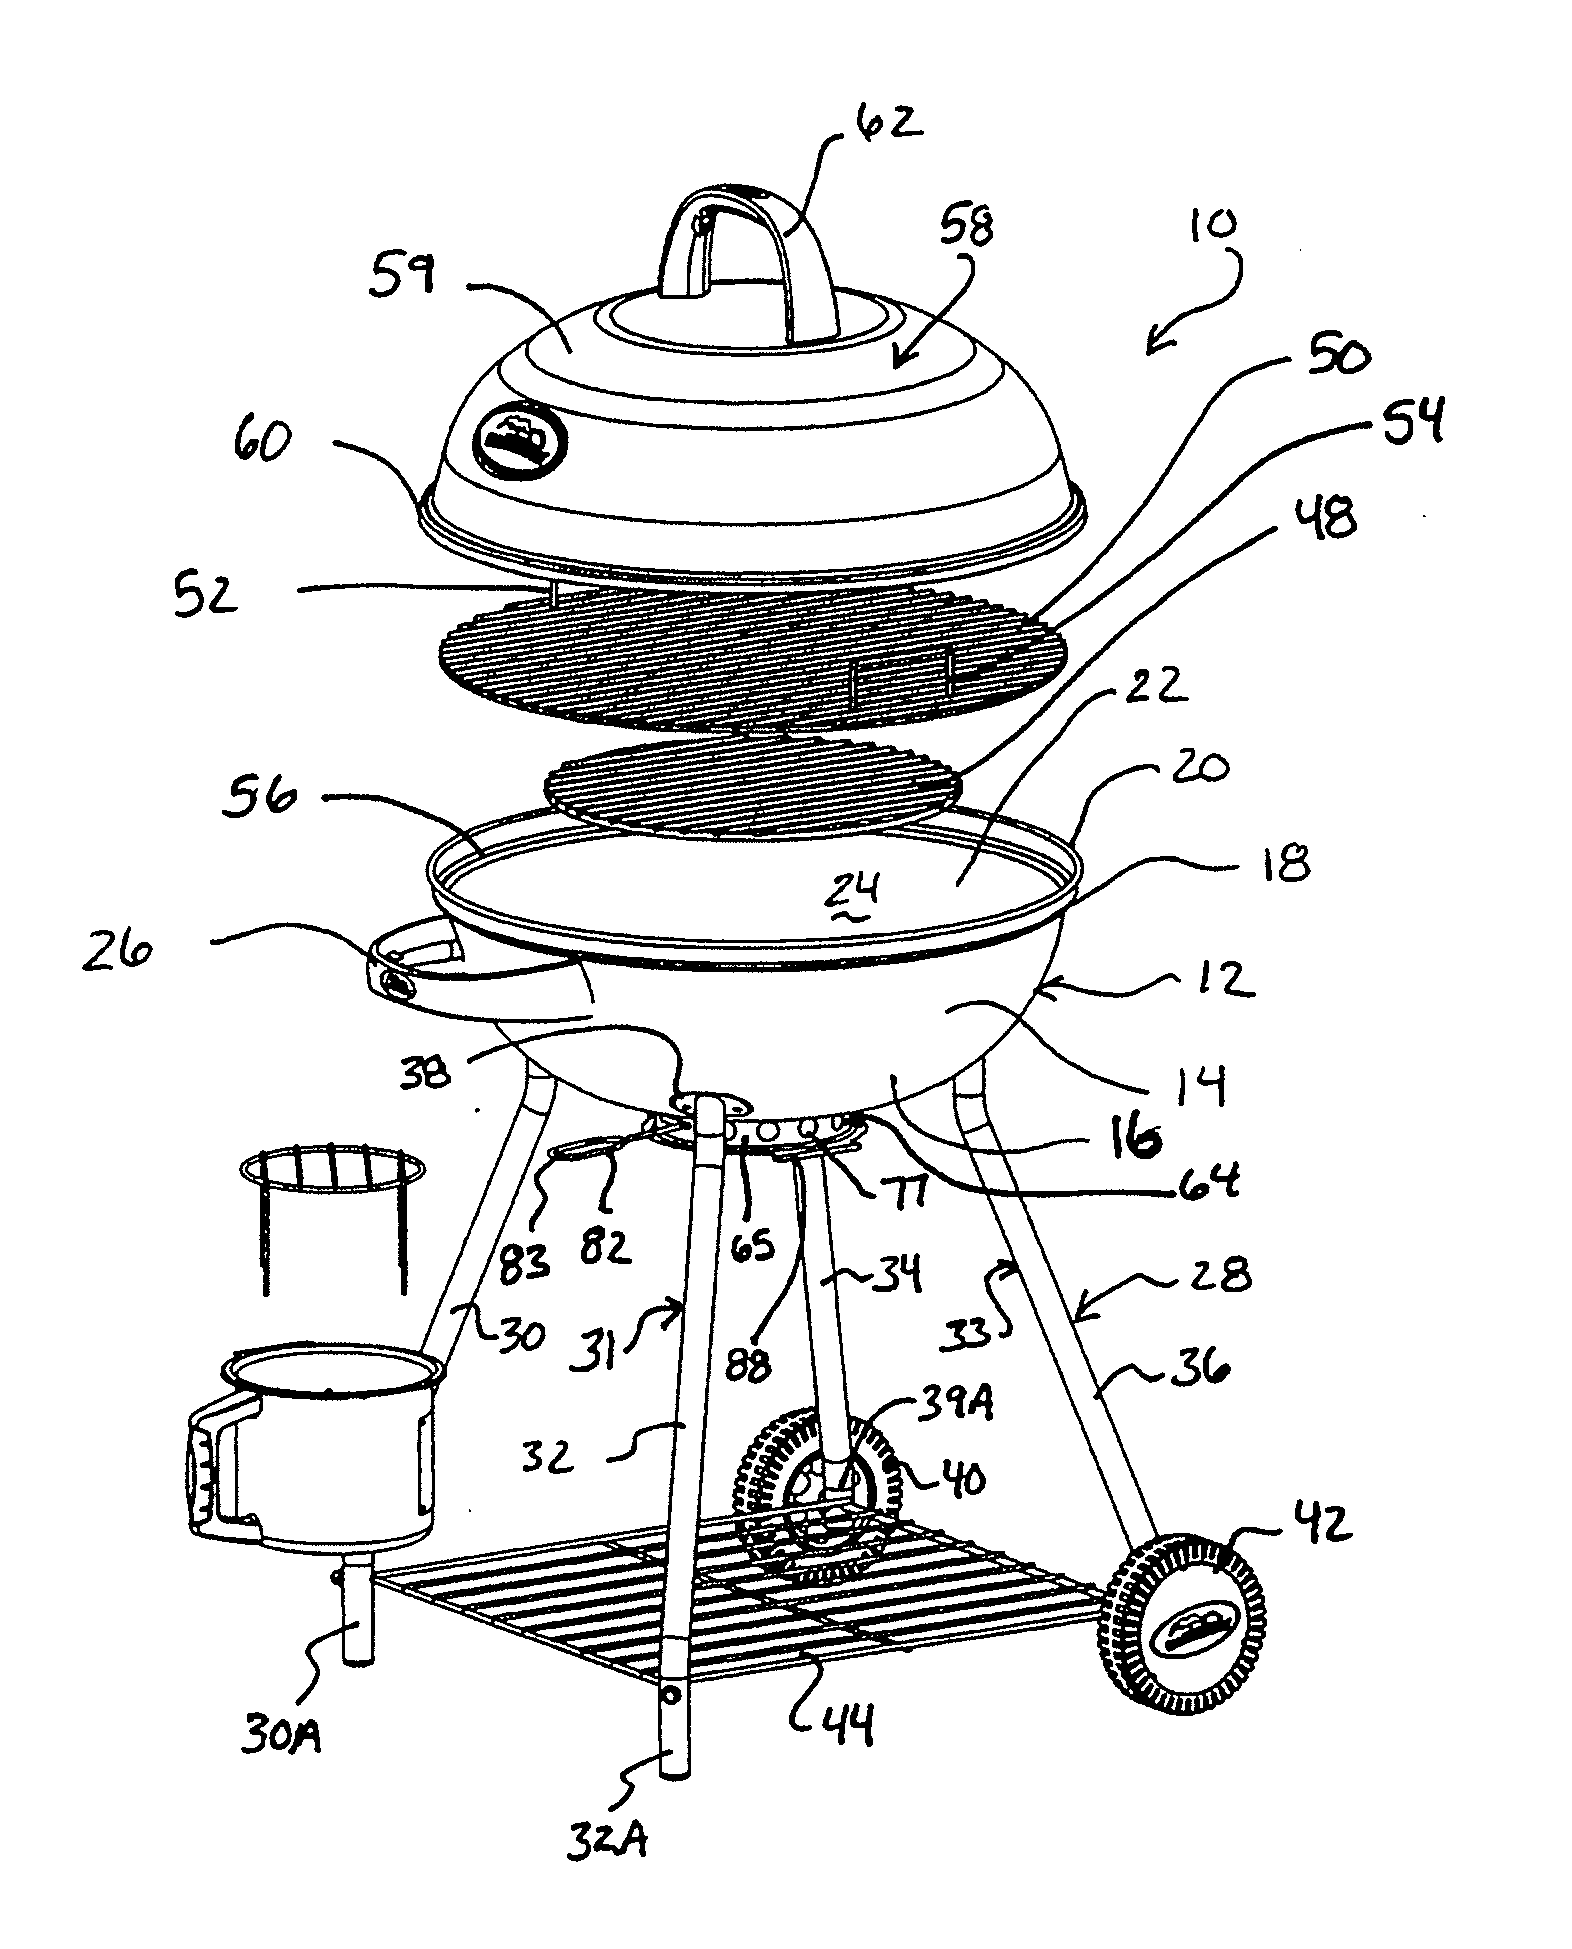 Cooking apparatus with a cooking fuel ignition facilitator and method of assembling and using same